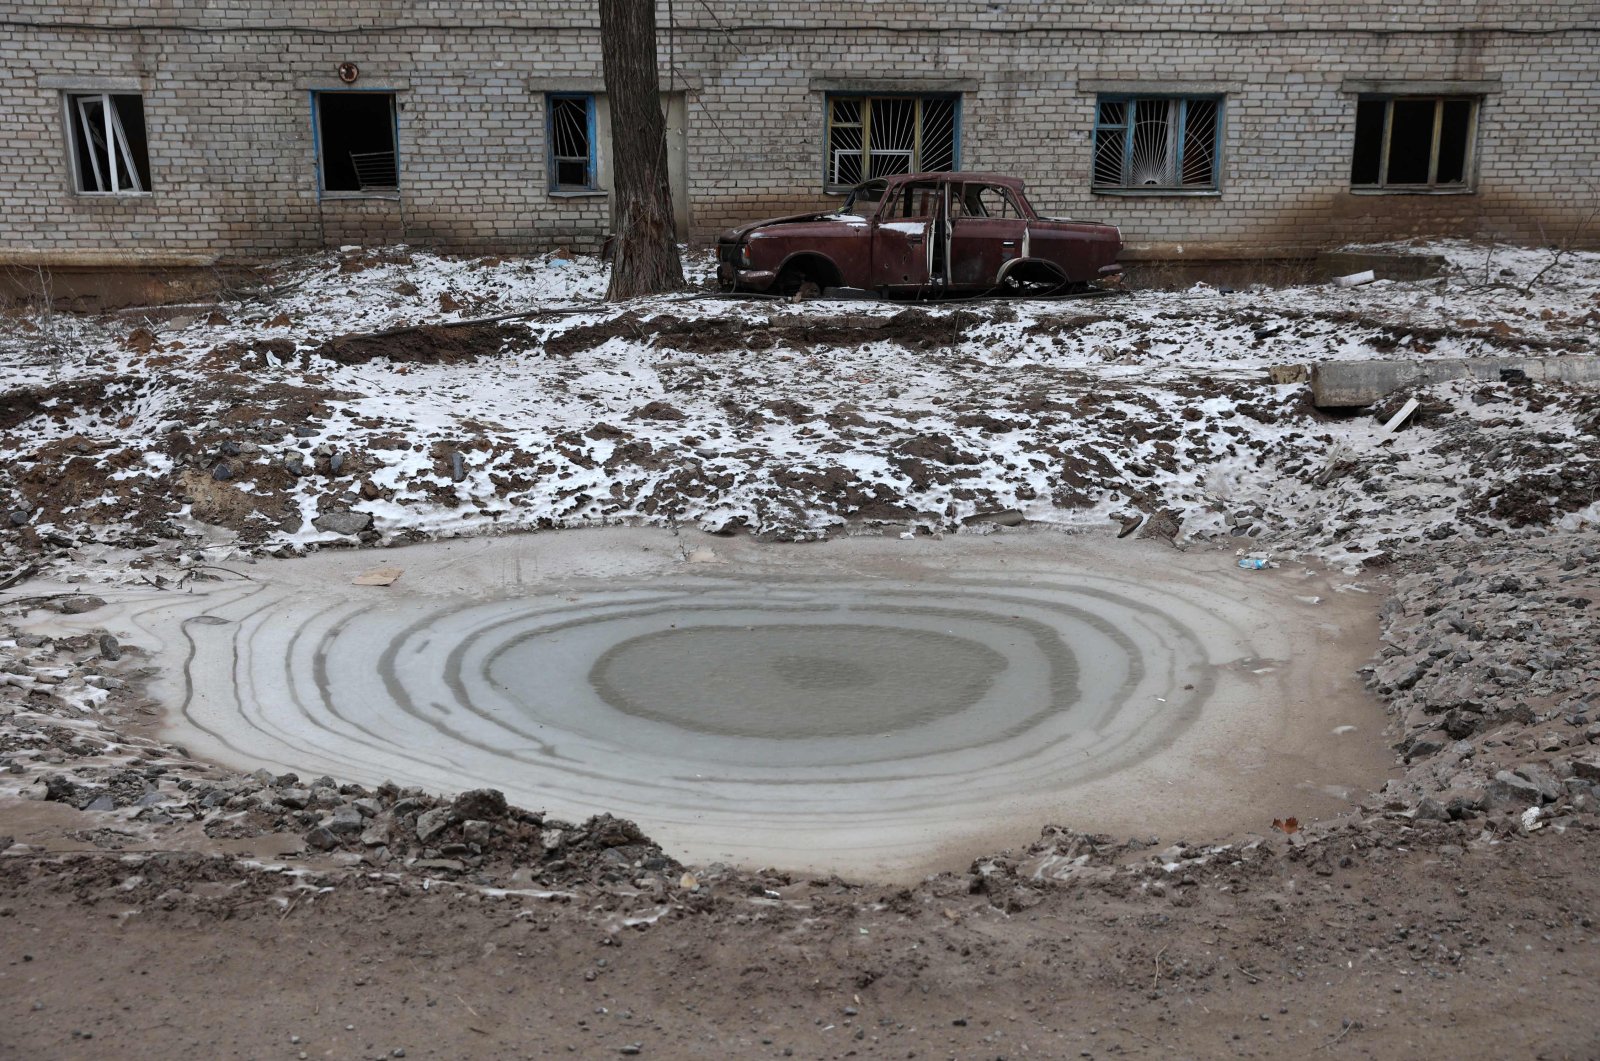 Ice covers a bomb crater in the town of Siversk, Donetsk region, as the Russia-Ukraine war enters its 324th day, Jan. 13, 2023. (AFP Photo)